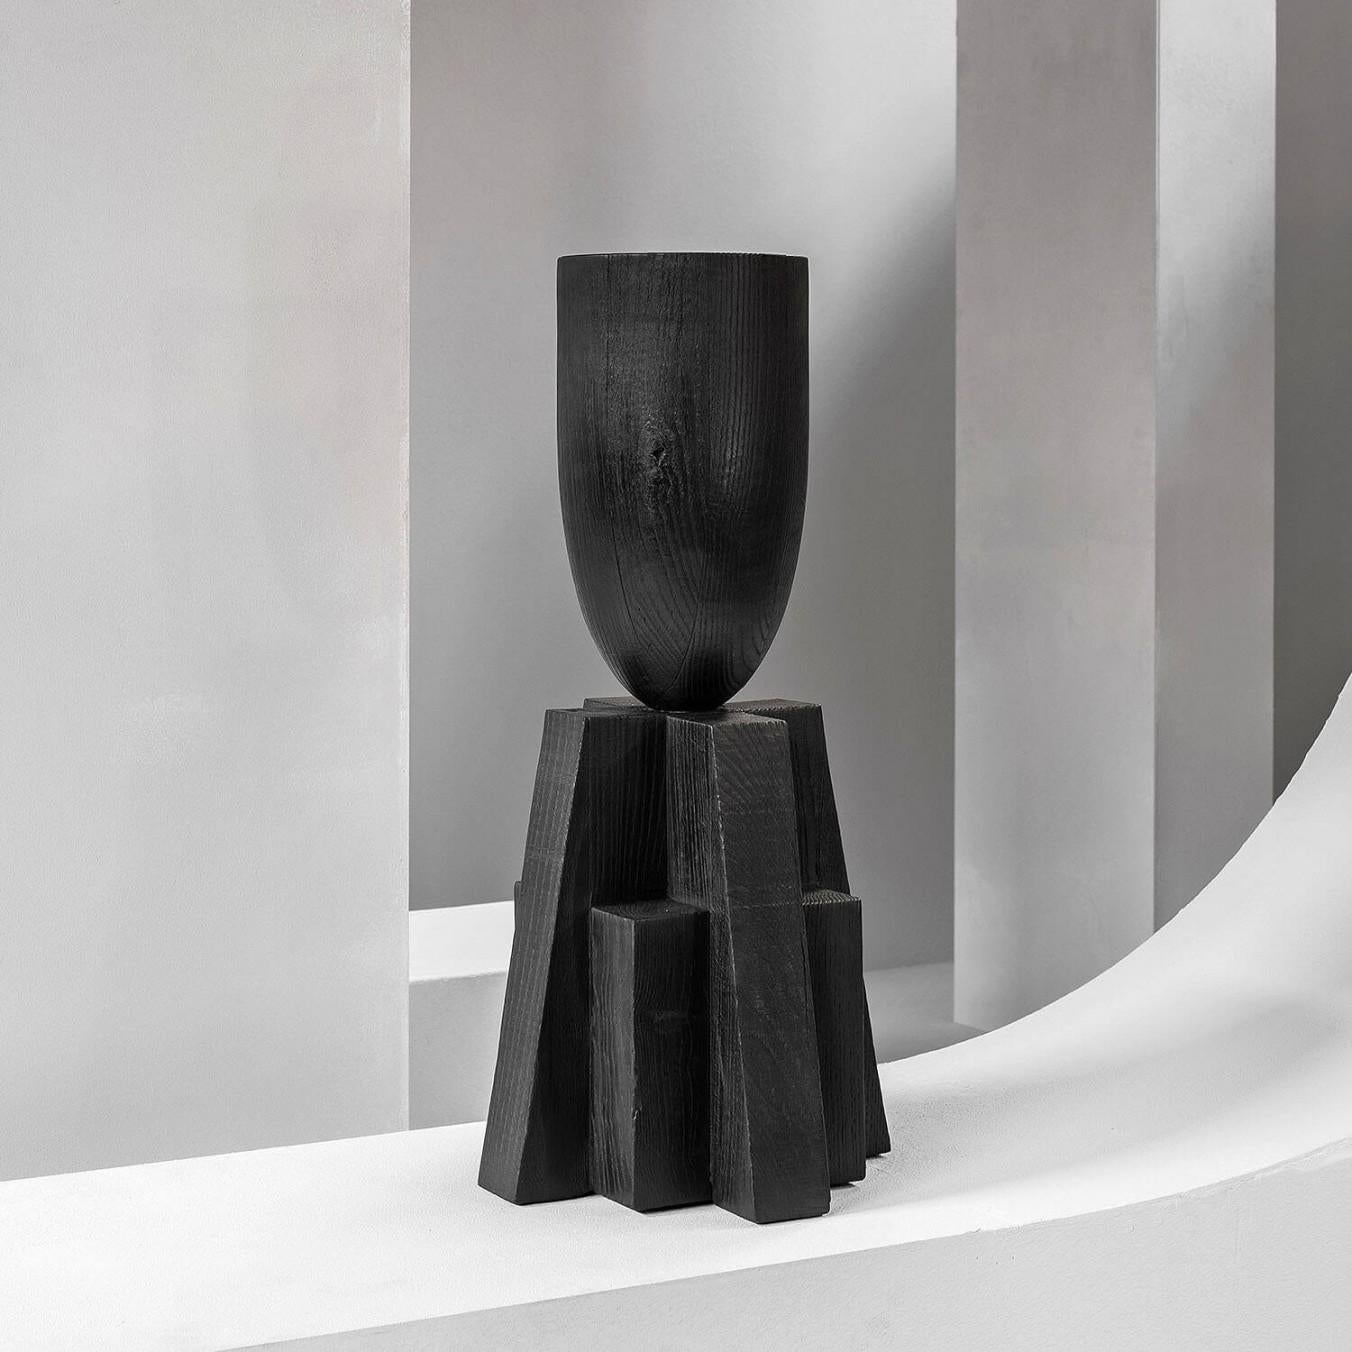 Contemporary Black Vase in Oak, Babel Vase by Arno Declercq

Dimensions: W 32 x L 32 x H 65 cm
Materials: Burned and waxed oak

Made by hand, in Belgium.

Arno Declercq
Belgian designer and art dealer who makes bespoke objects with passion